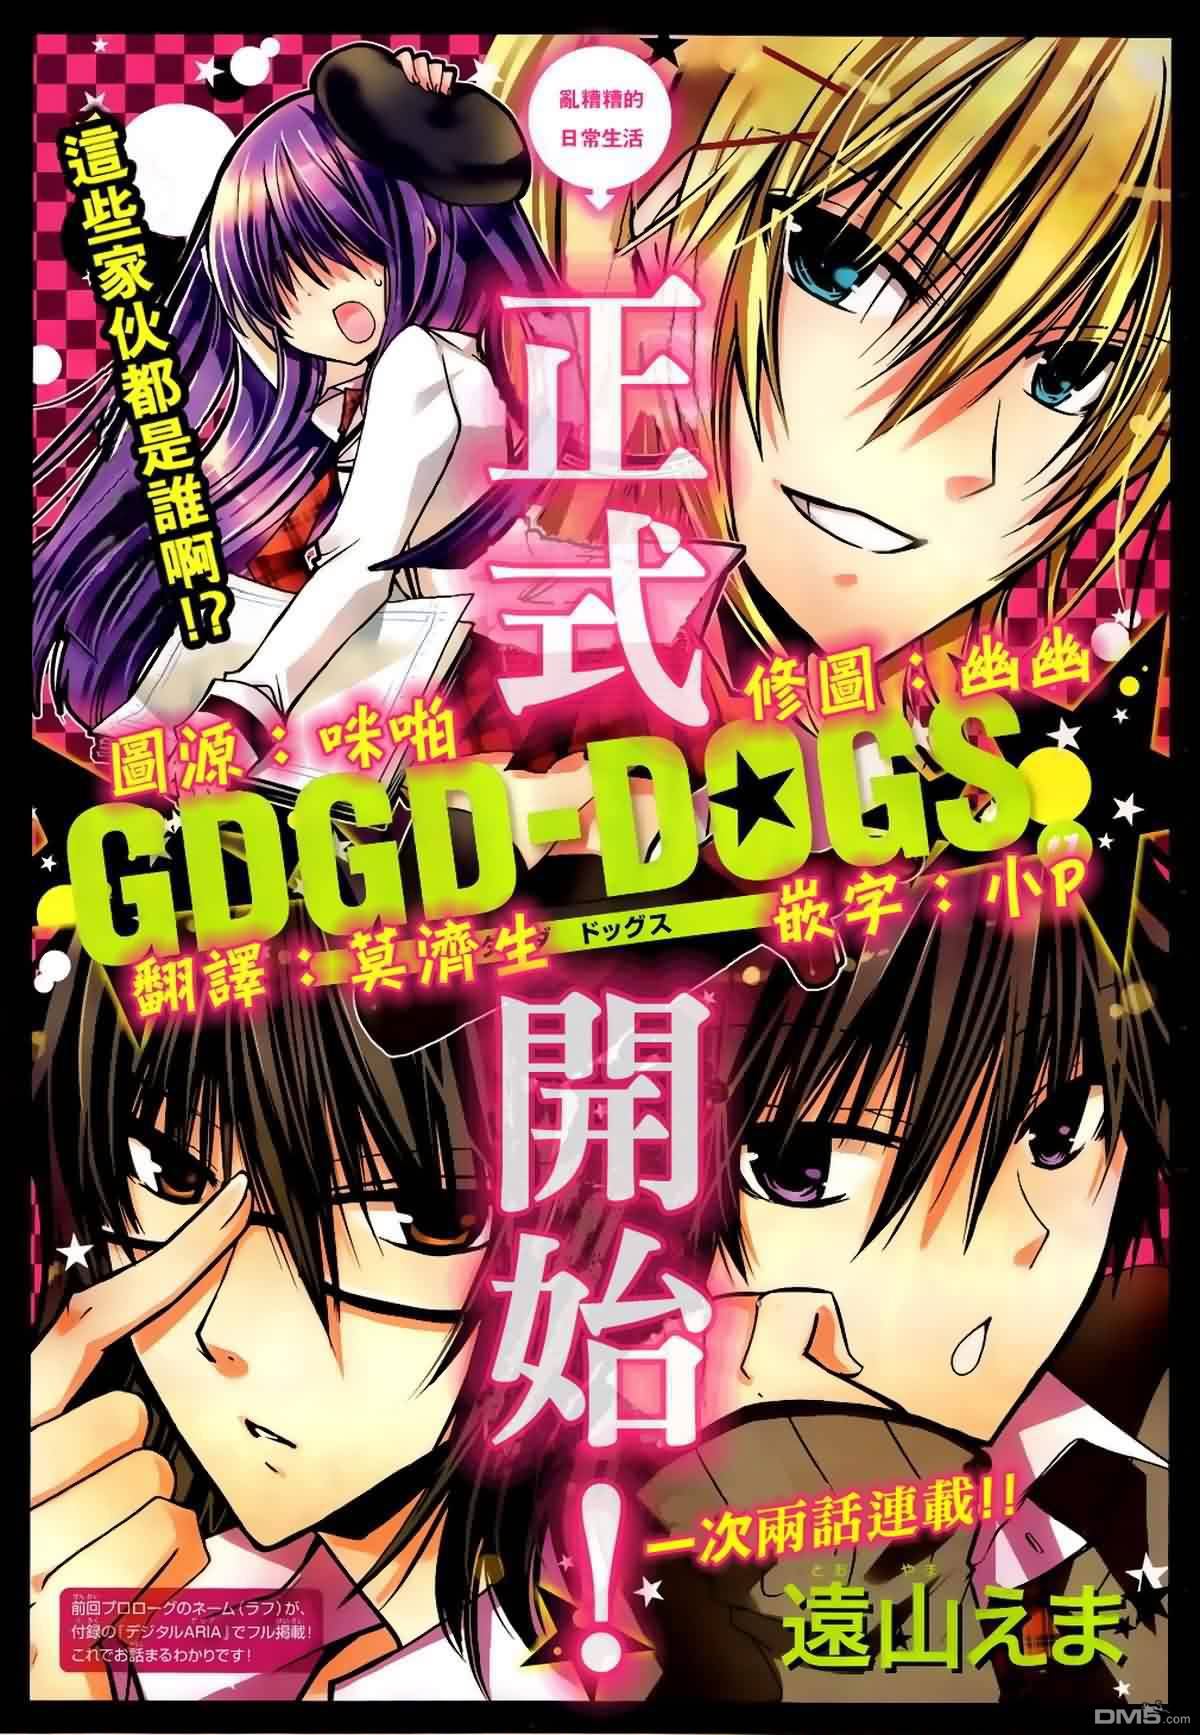 GDGD-DOGS第1话